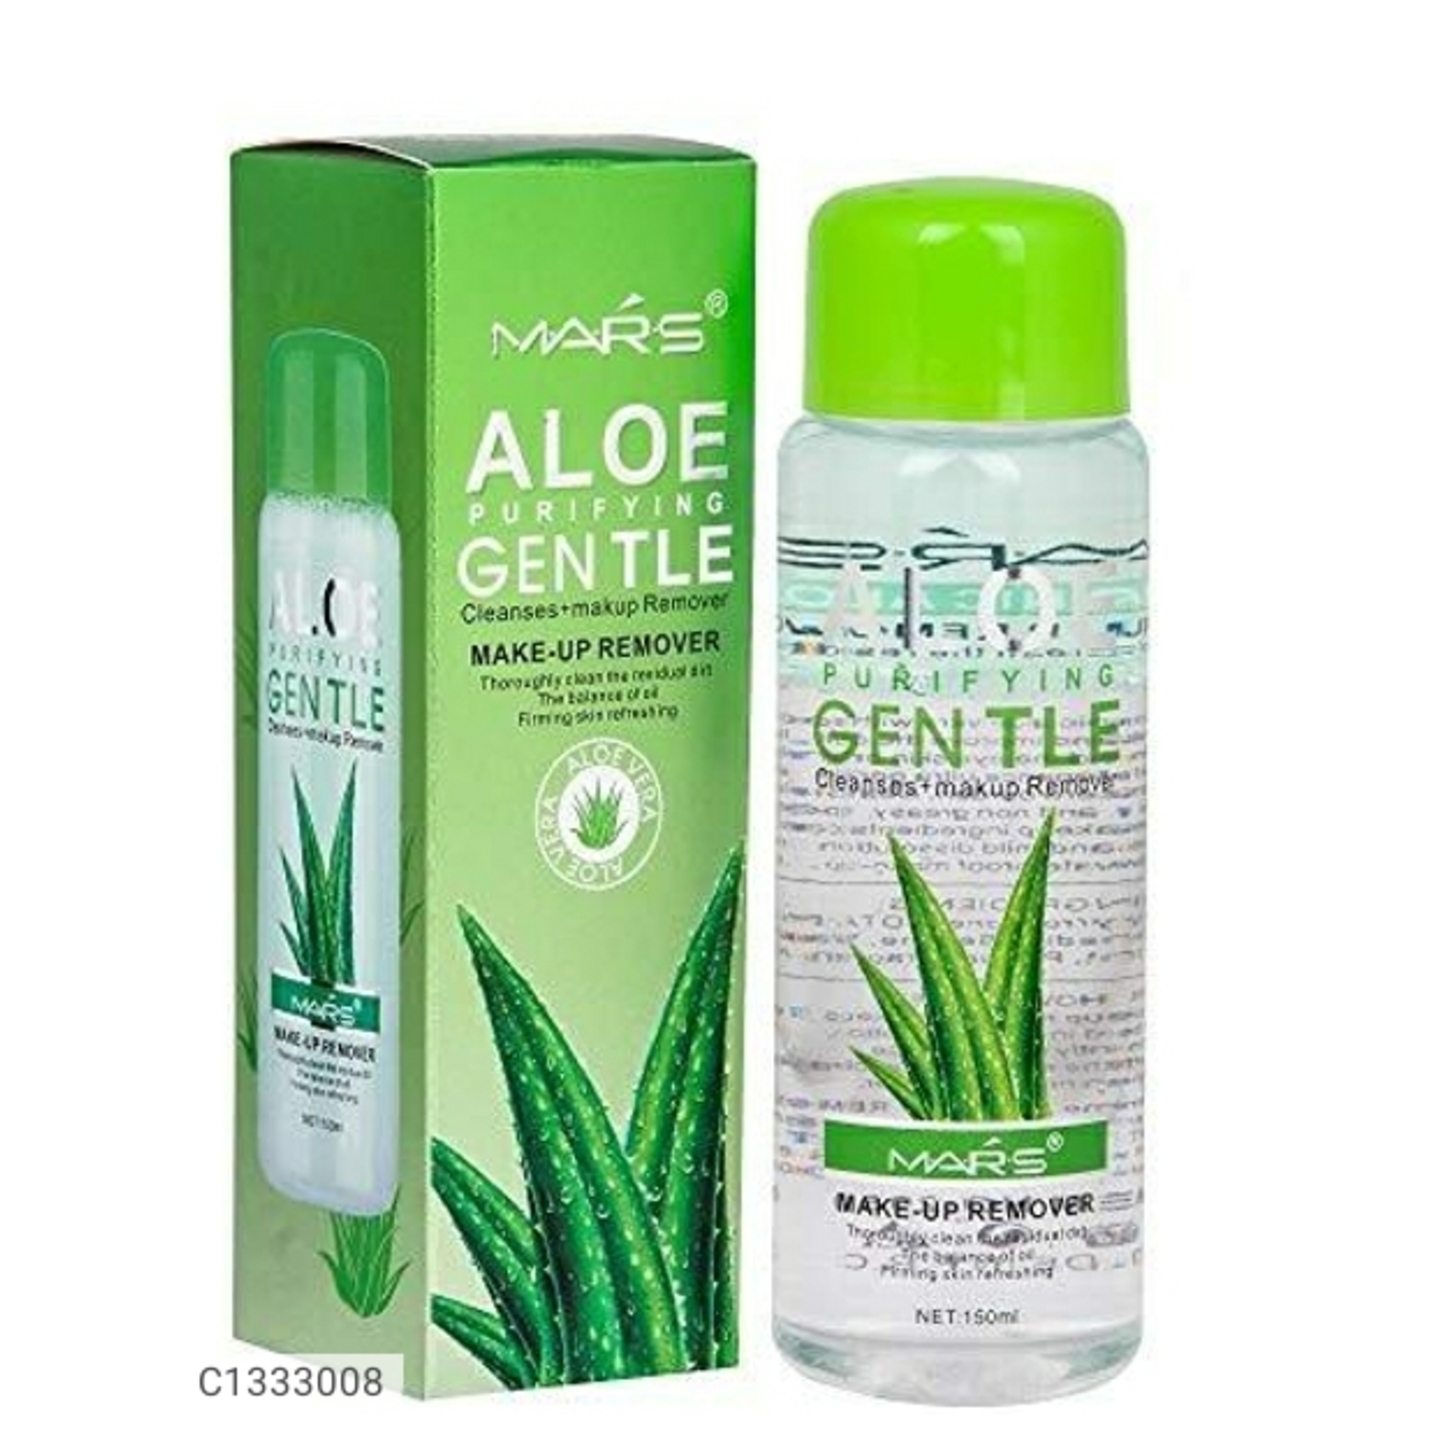 Mars Aloe Makeup Remover, 60 ml (Pack of 1)